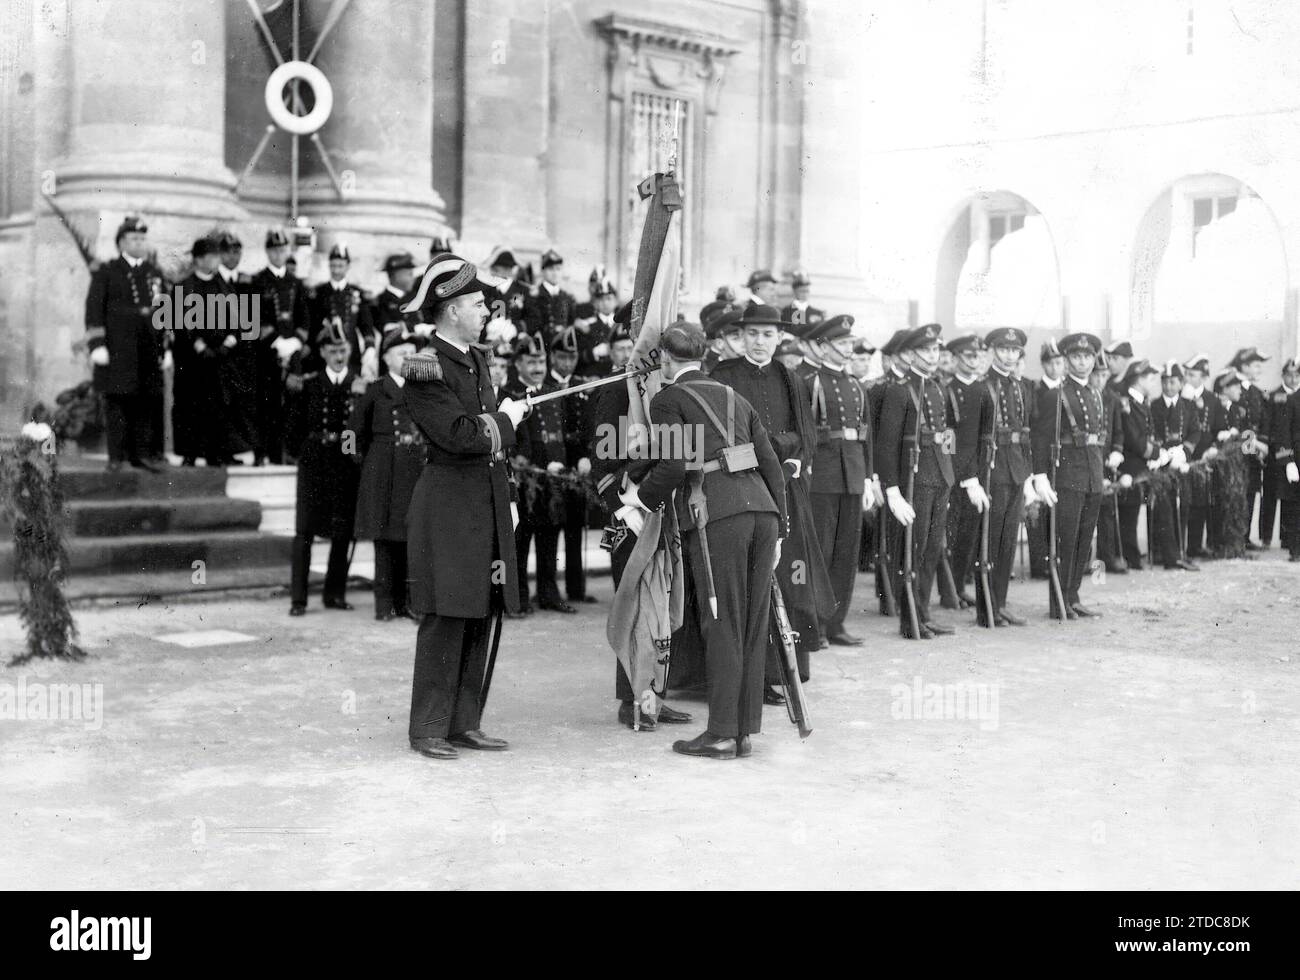 11/12/1922. San Fernando. Solemn Ceremony. Flag swearing by the New ...